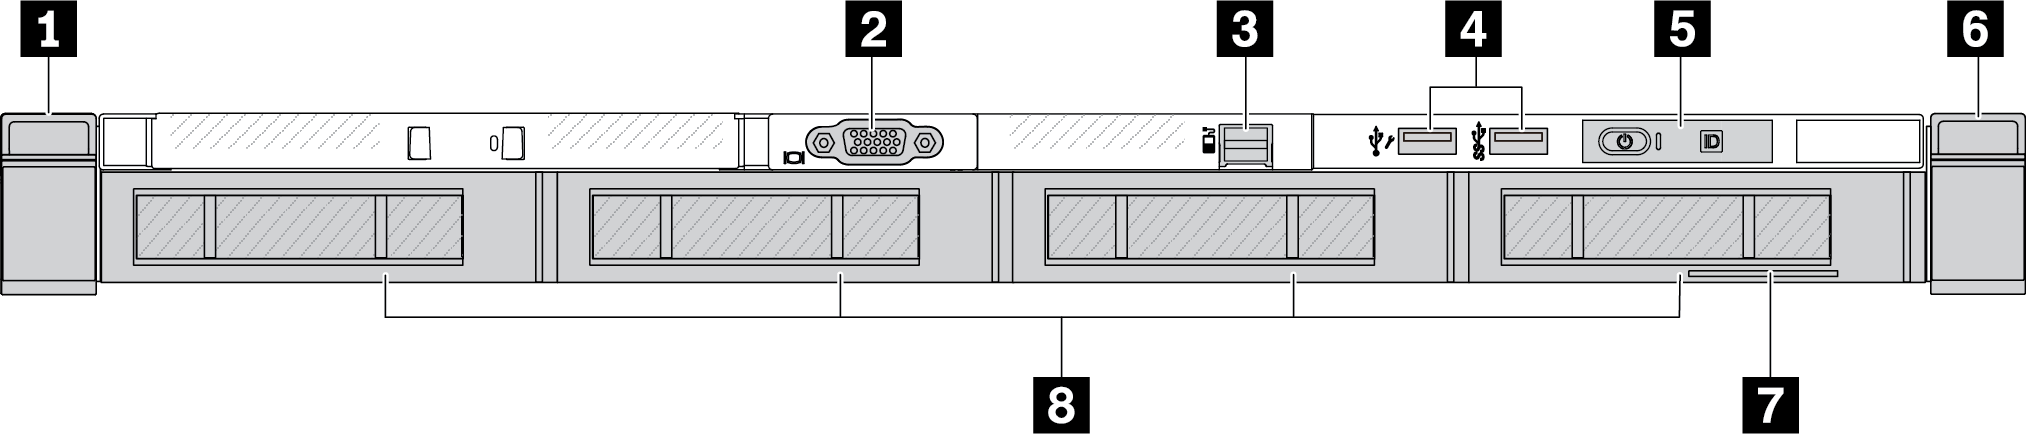 Server model with four 3.5-inch drive bays (backplane-less)